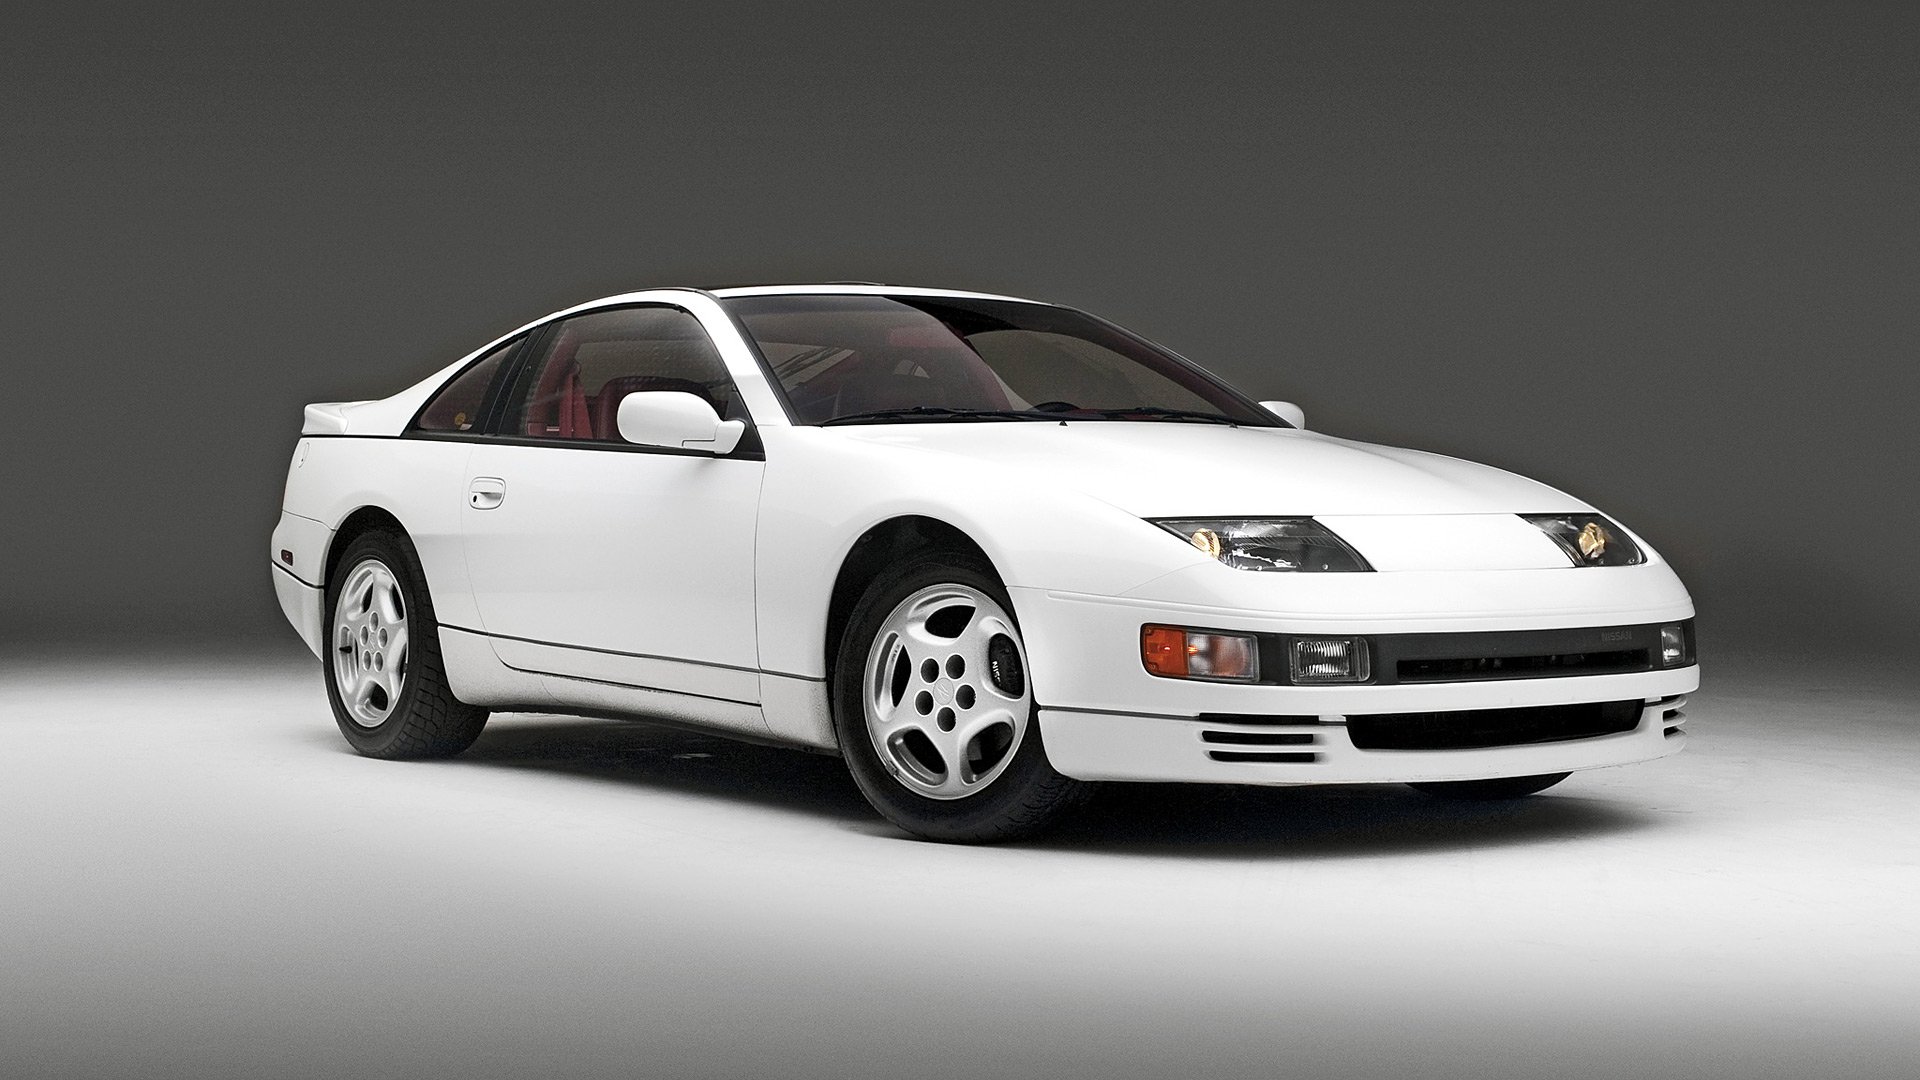 300zx fairlady 1080P 2k 4k HD wallpapers backgrounds free download   Rare Gallery